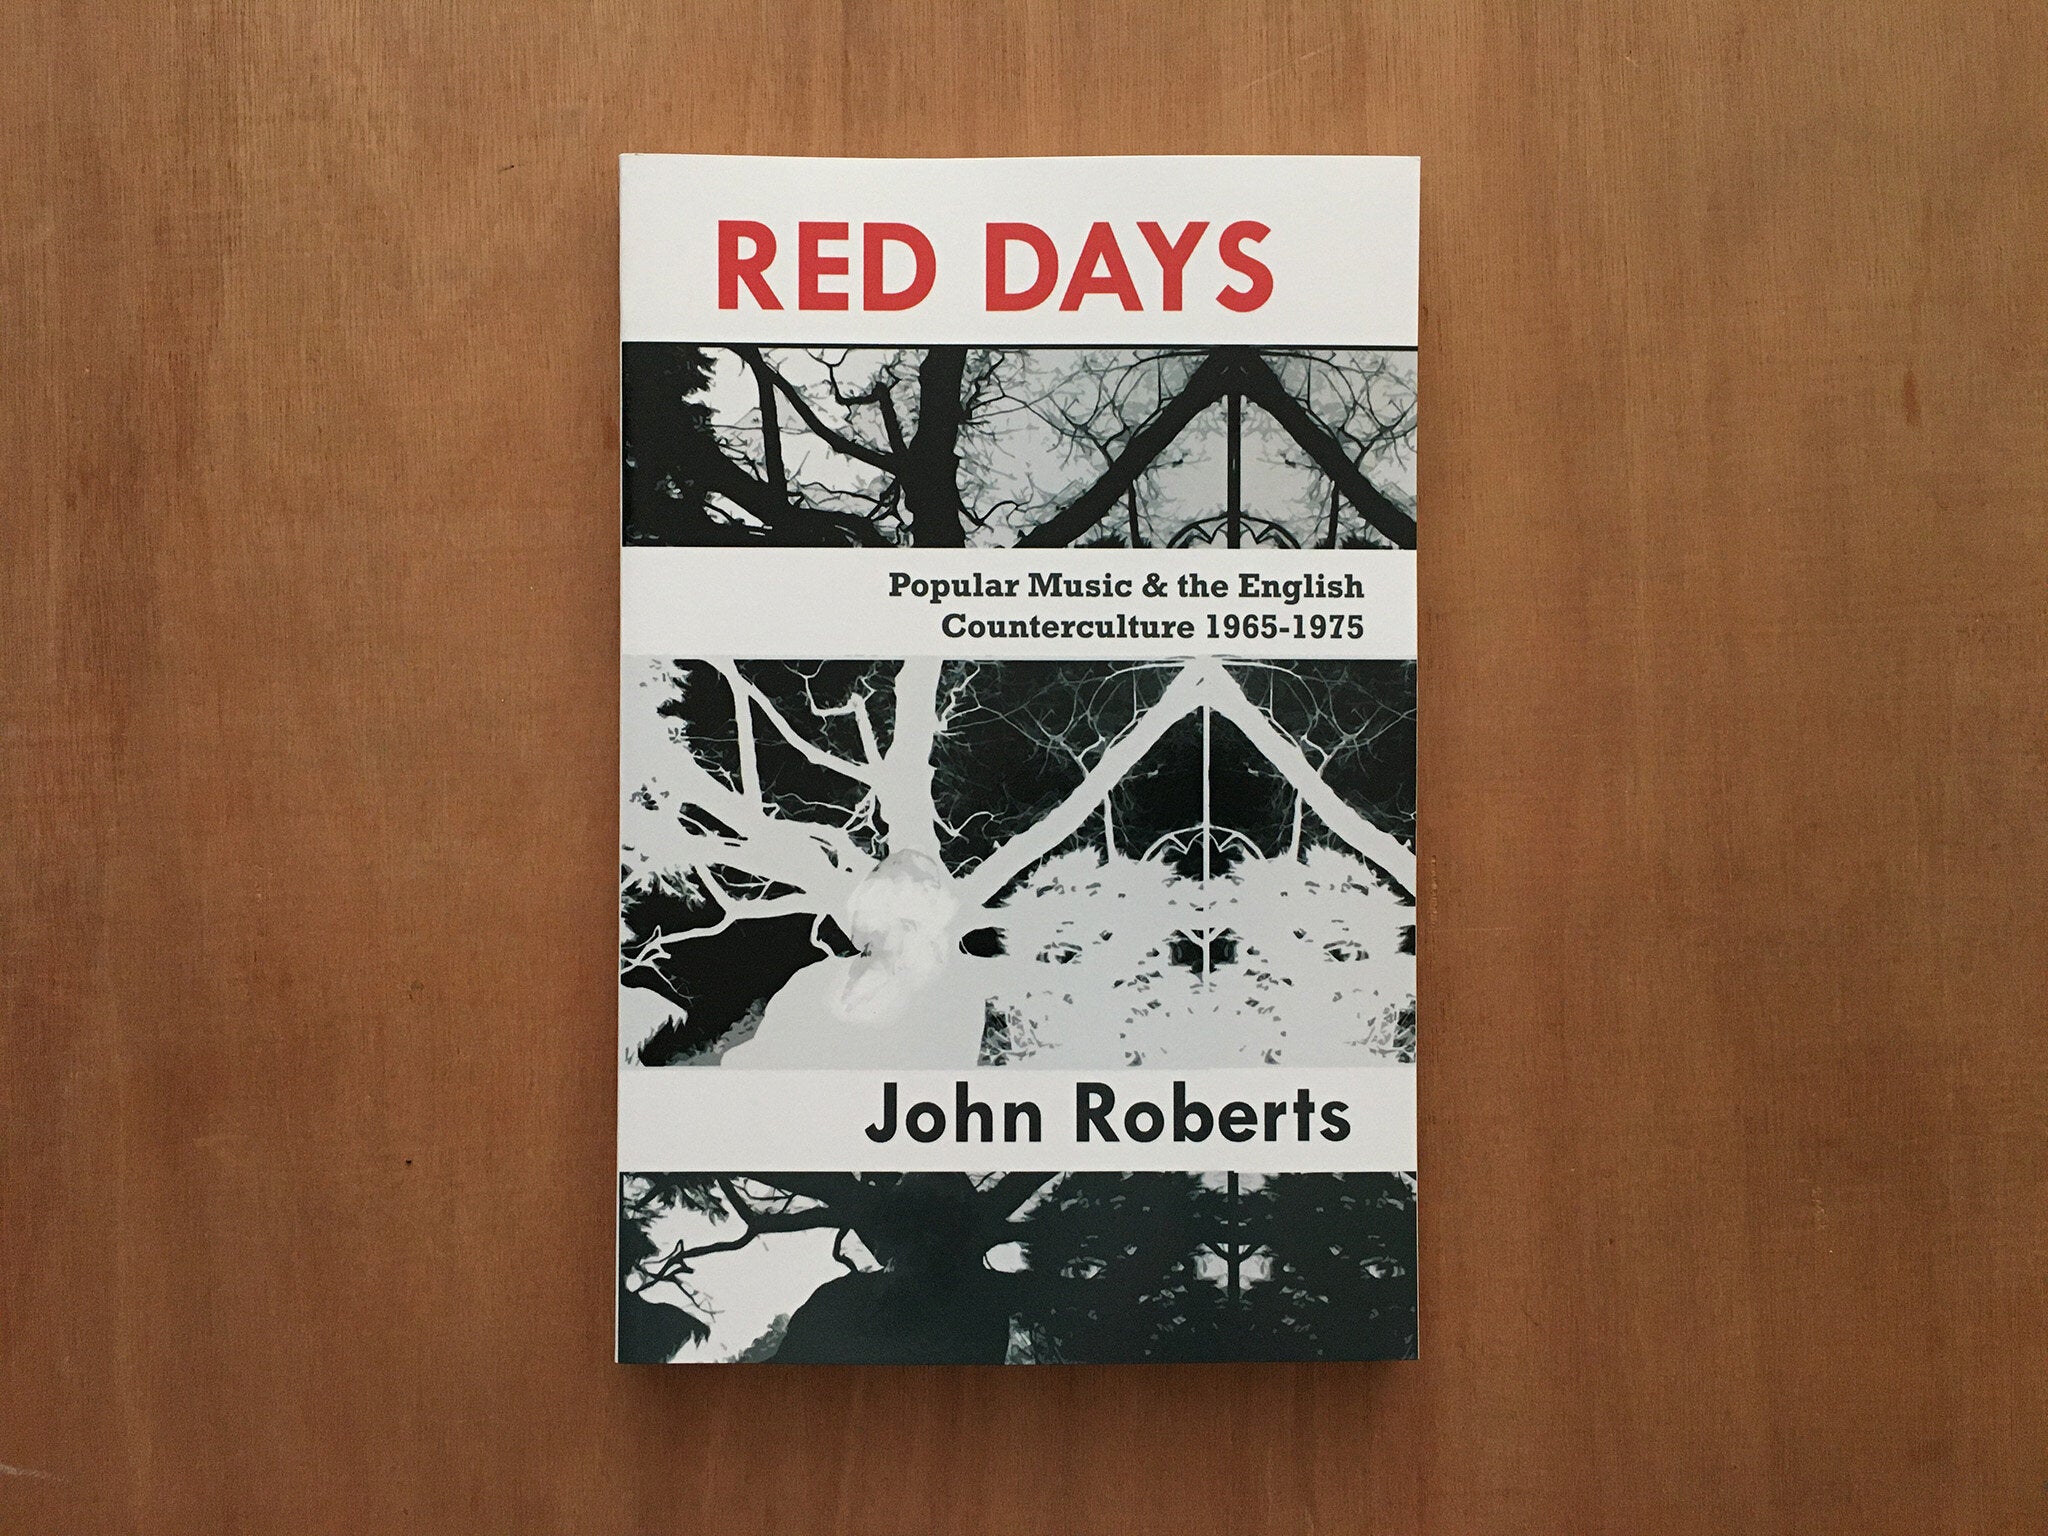 RED DAYS: POPULAR MUSIC and THE ENGLISH COUNTERCULTURE 1965-1975 by John Roberts